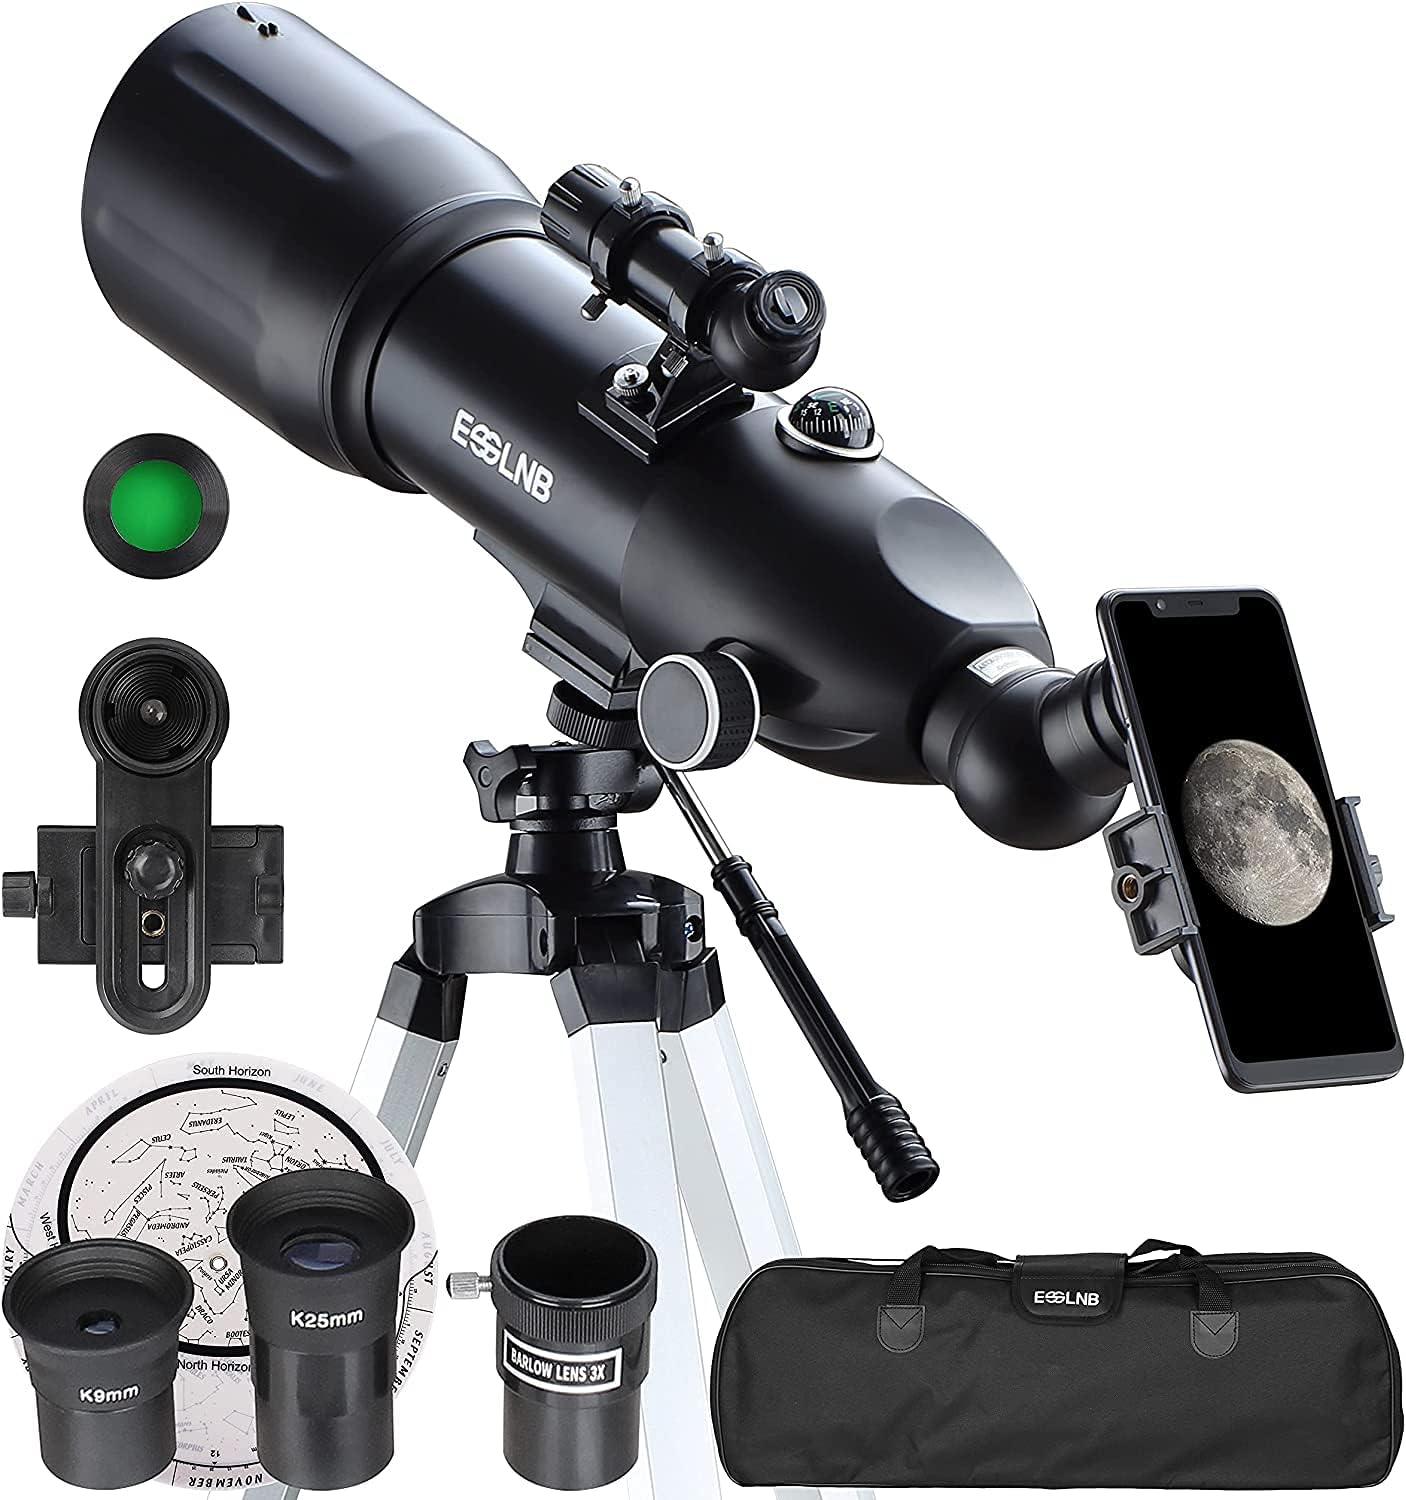 ESSLNB Telescopes for Adults Kids Astronomy, 80mm Astronomical Travel Telescopes with Moon Filter, Erect Image, 10 Times Refractor, Tripod and Carrying Bag for Astronomy Beginners (40080 Telescope)